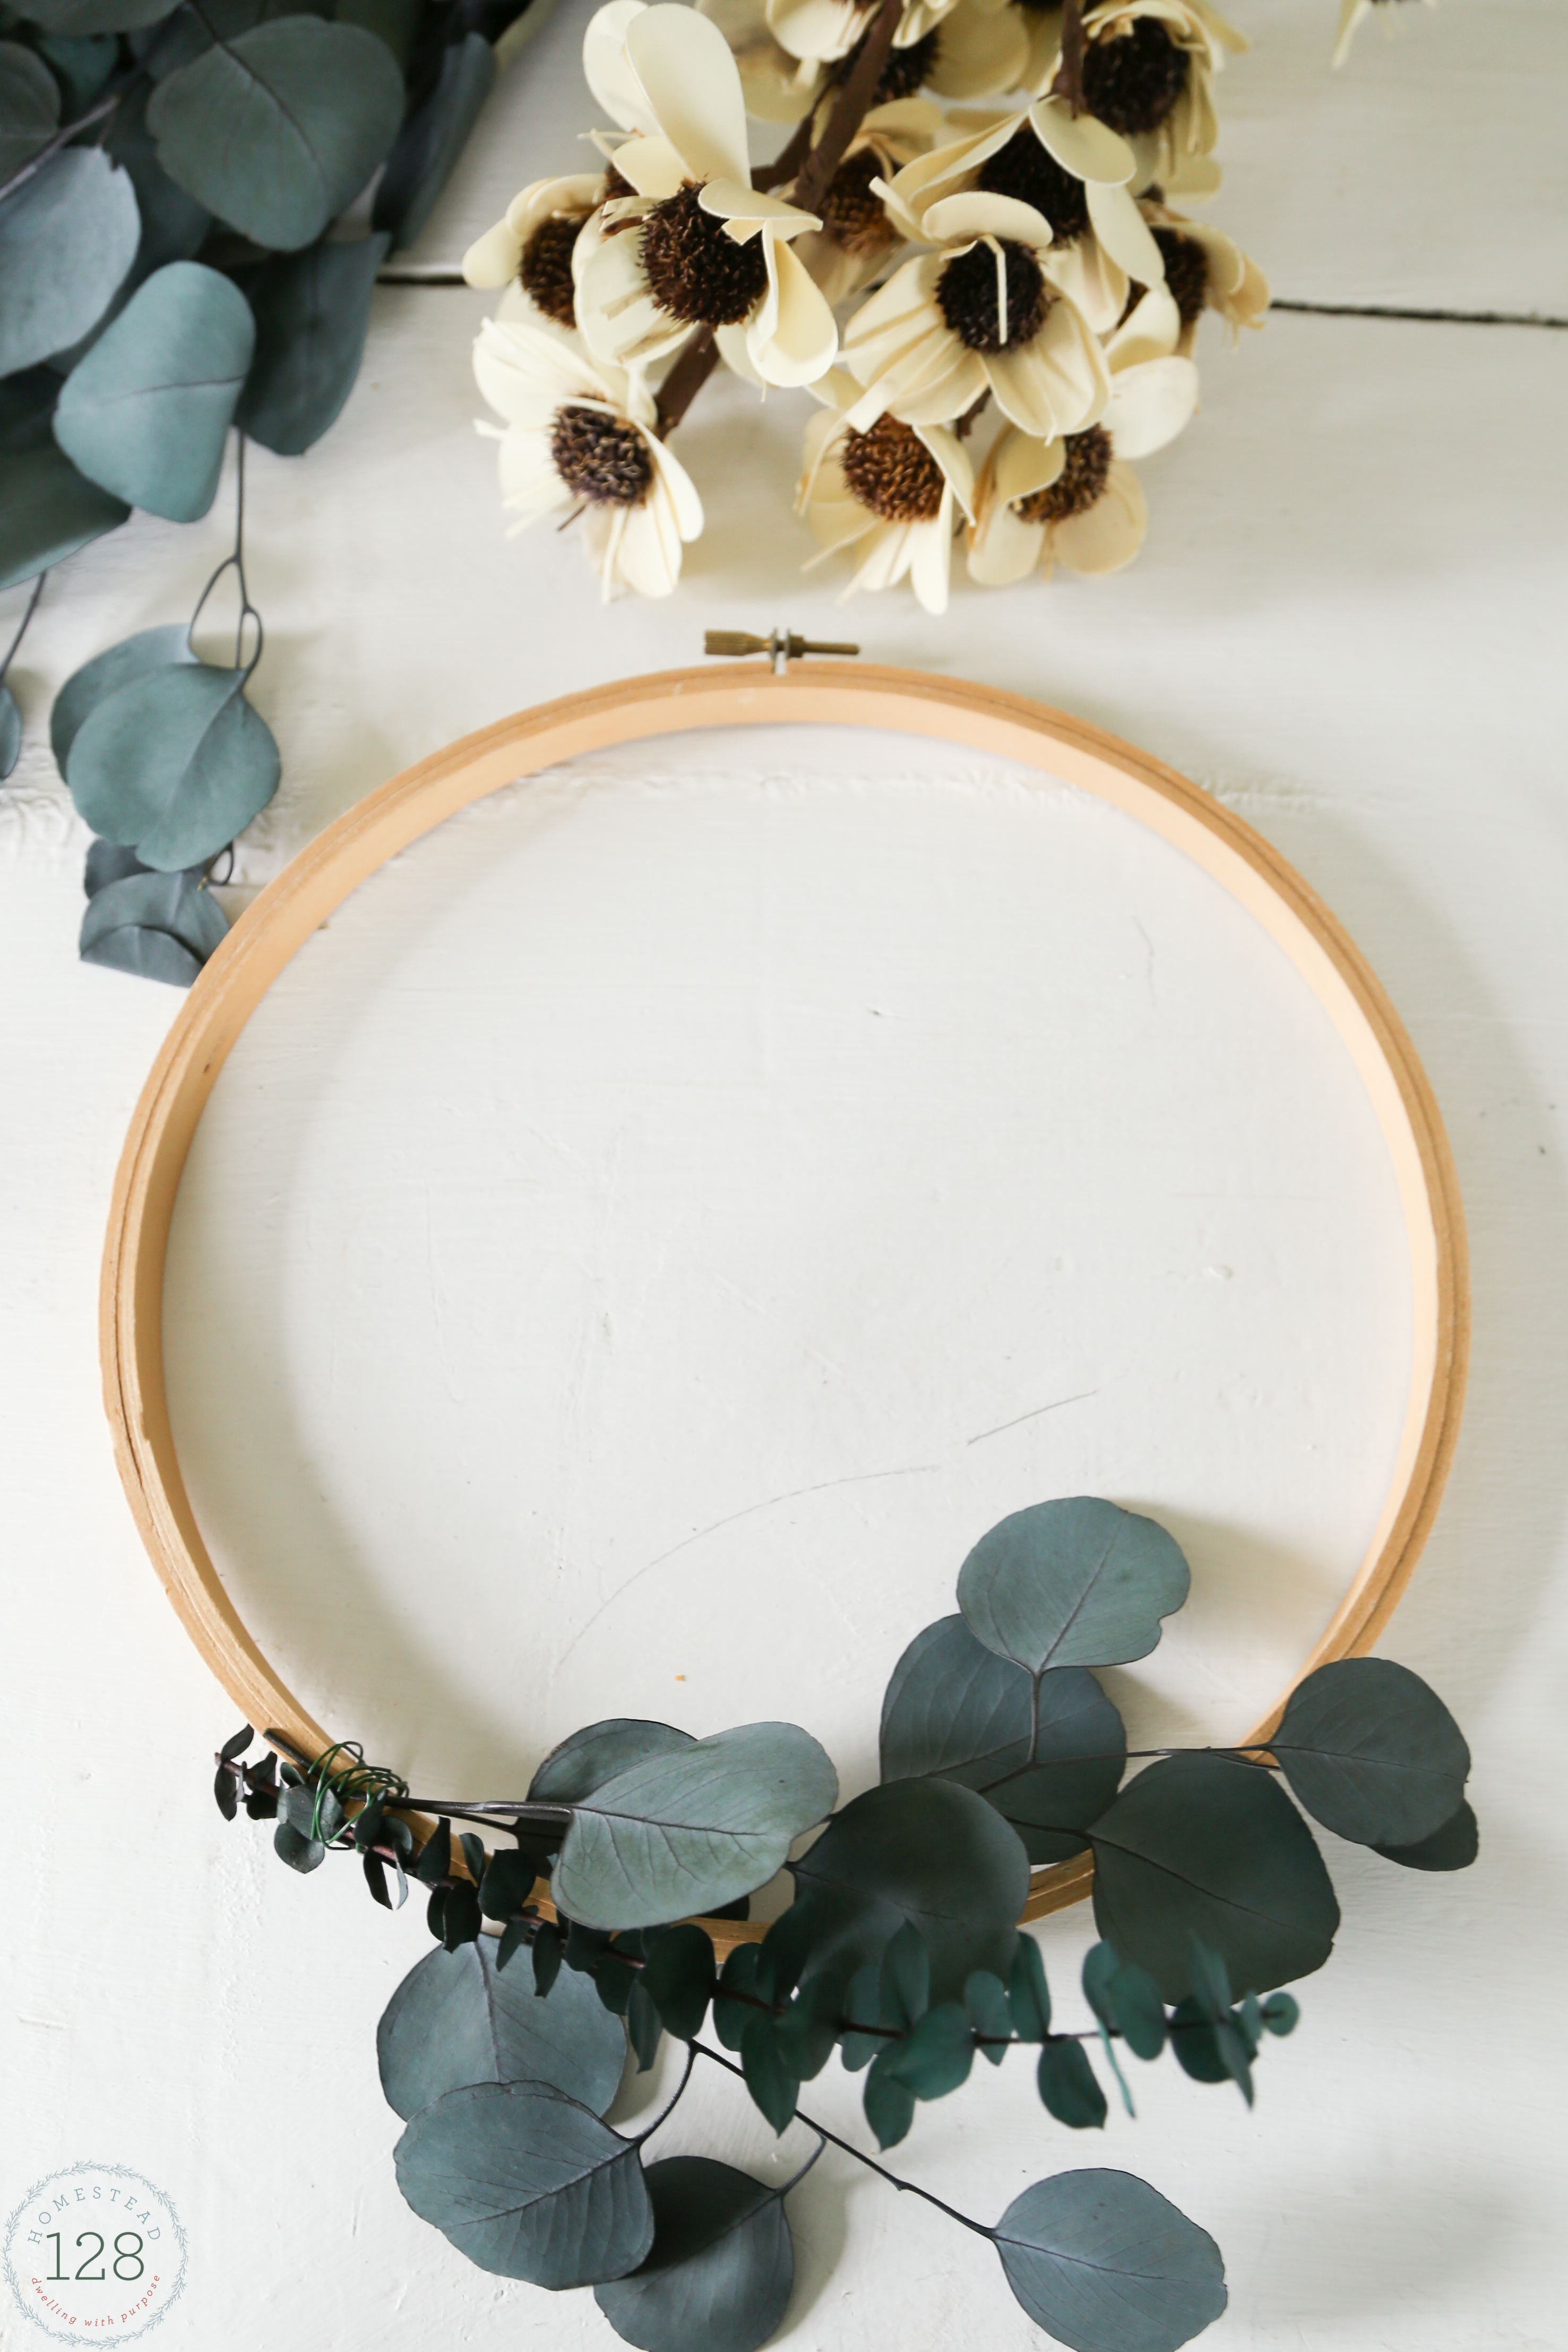 Eucalyptus and white flowered wreath made from embroidery hoops. An easy eucalyptus wreath DIY.